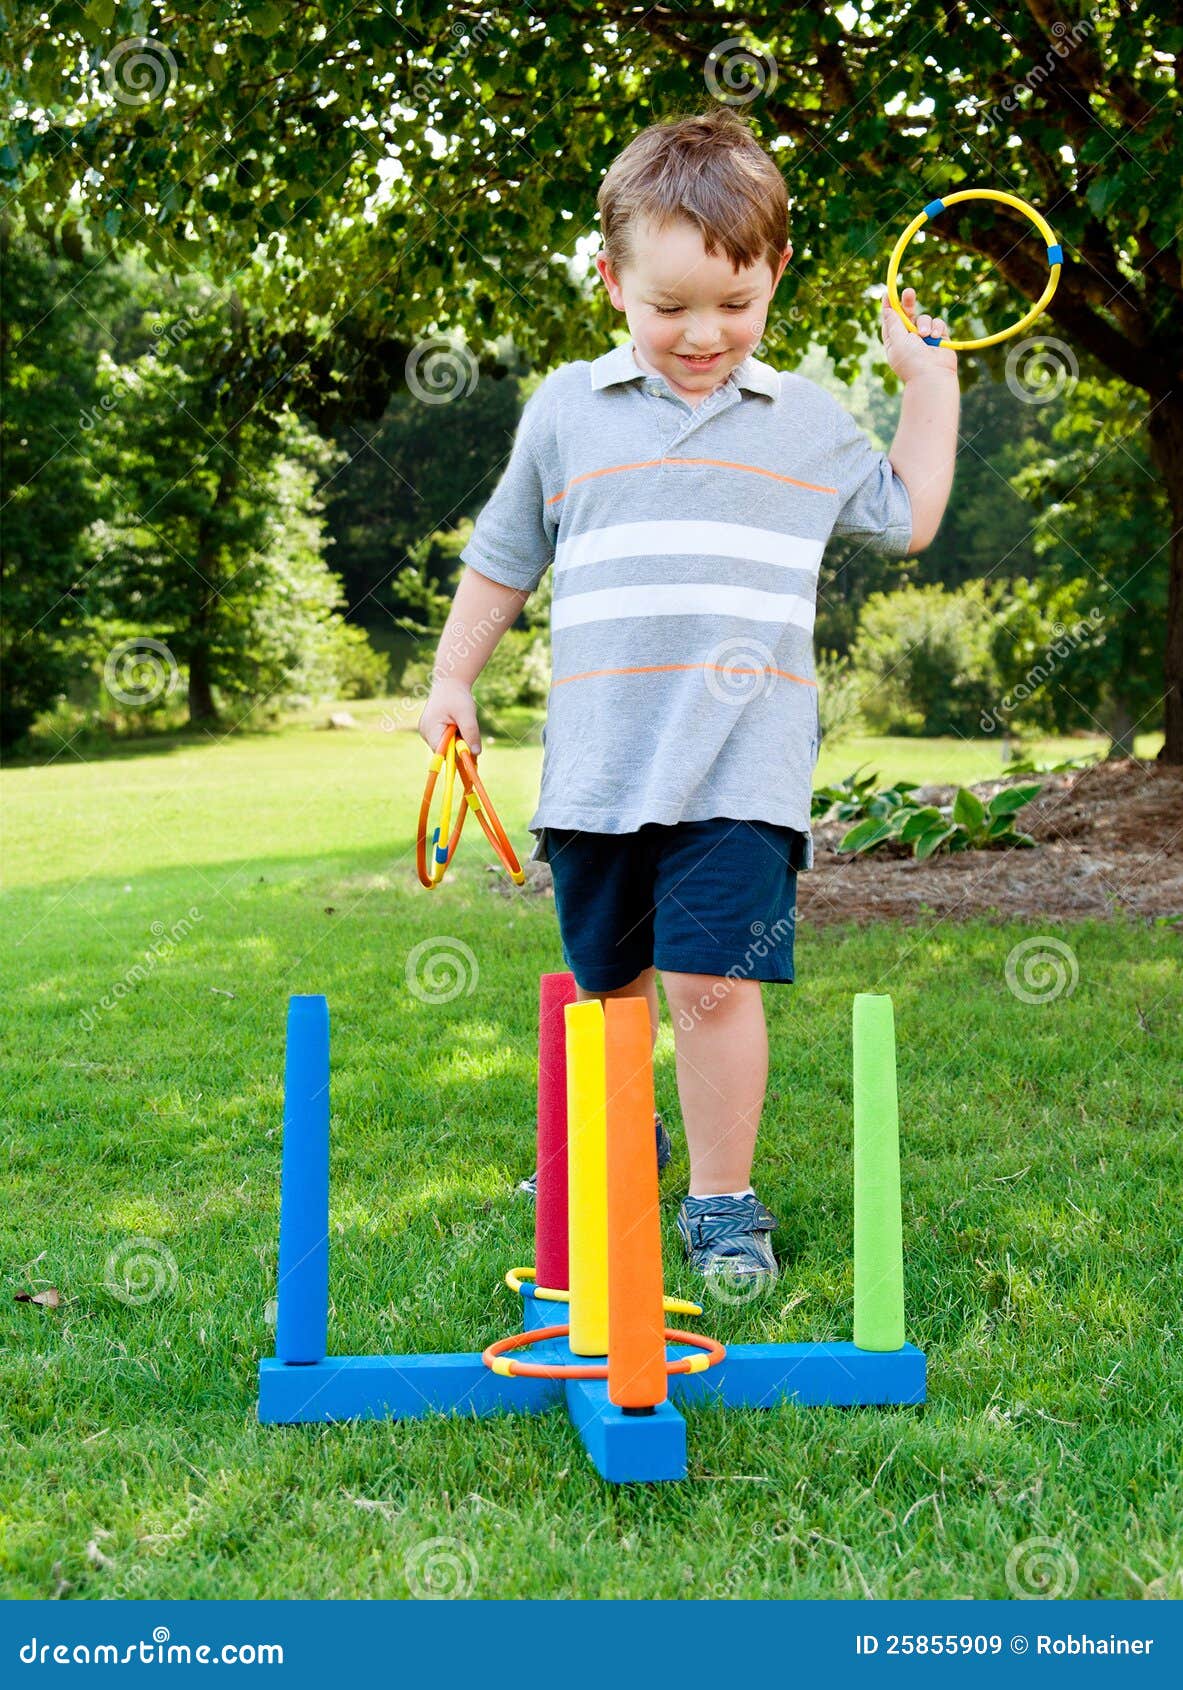 child playing ring toss